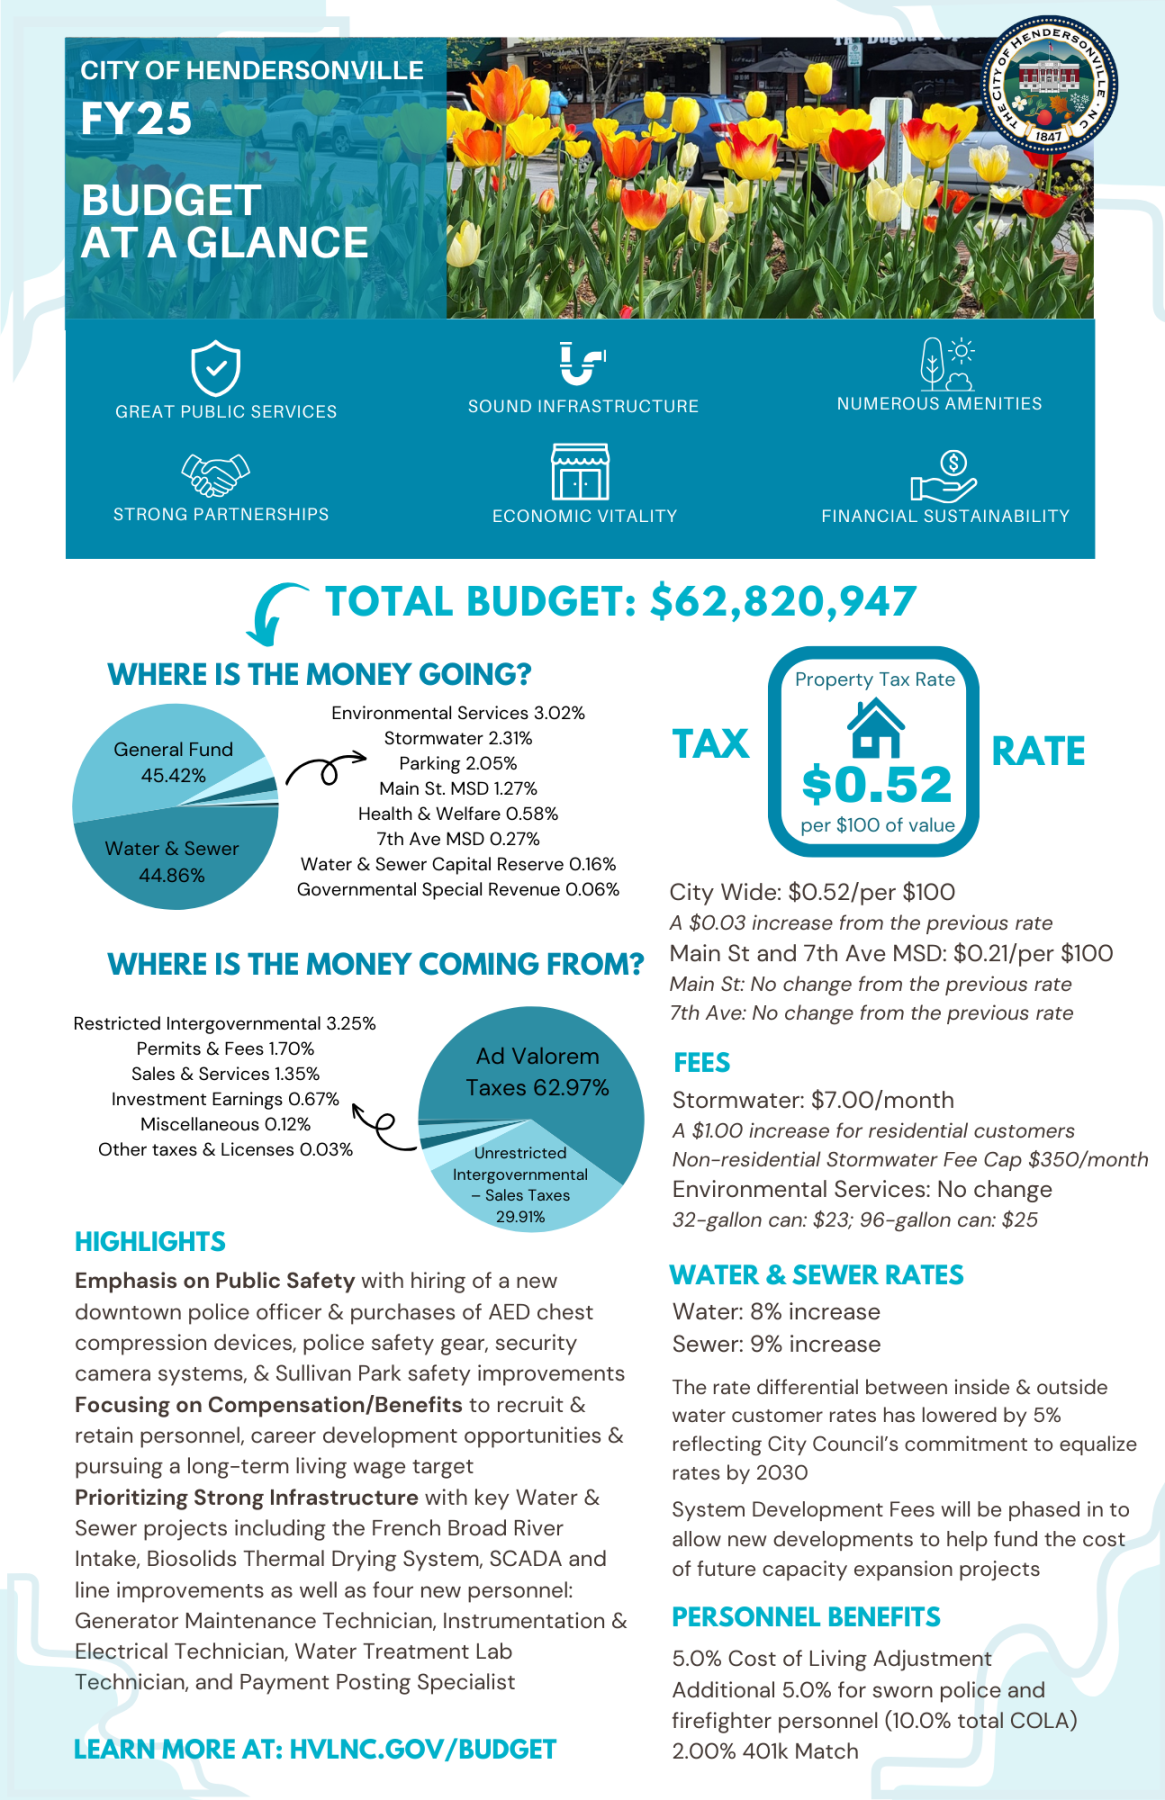 infographic with icons for the six city council focus areas, pie charts for revenues and expenditures